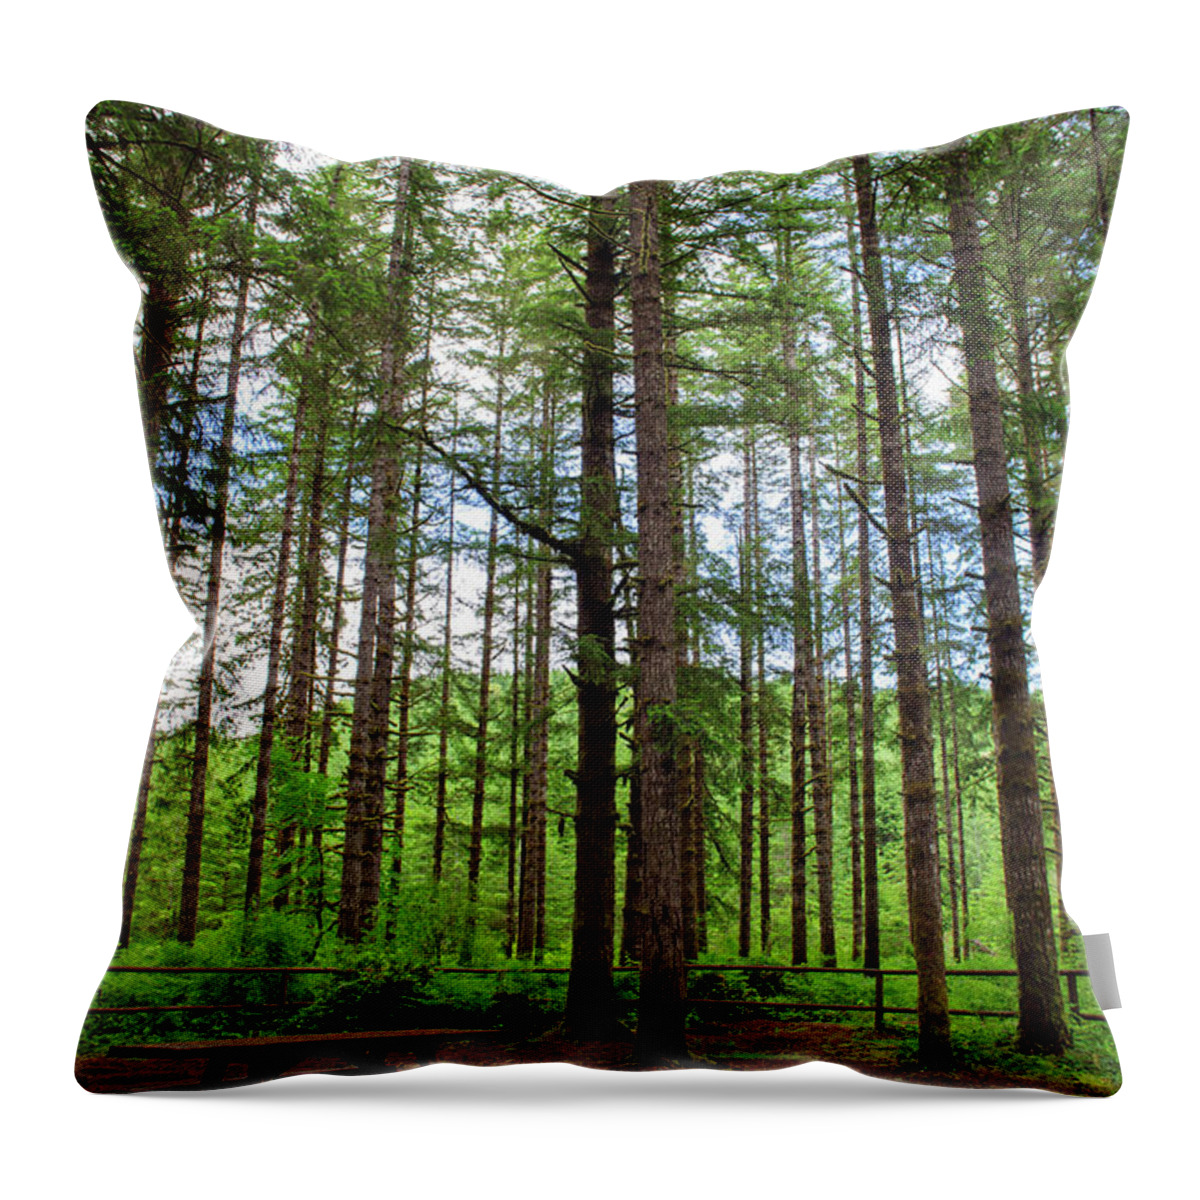 Capital Forest Throw Pillow featuring the photograph Middle Waddle Campground by Tikvah's Hope